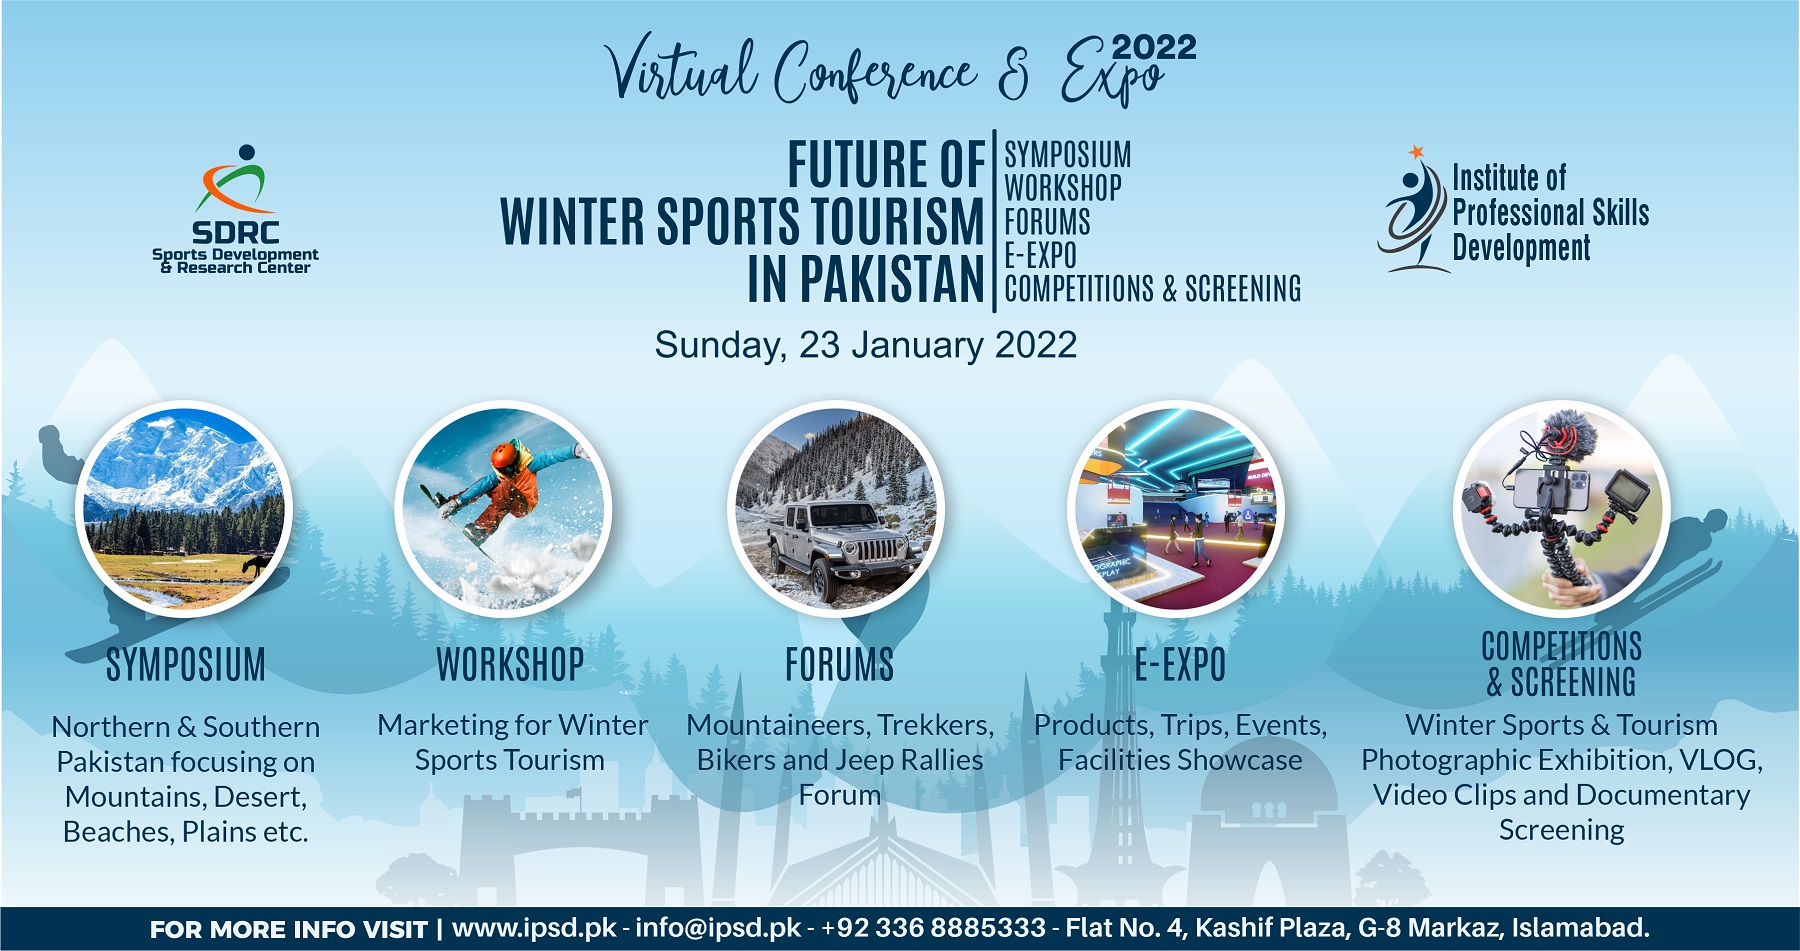 FUTURE OF WINTER SPORTS TOURISM IN PAKISTAN – Virtual Conference & Expo